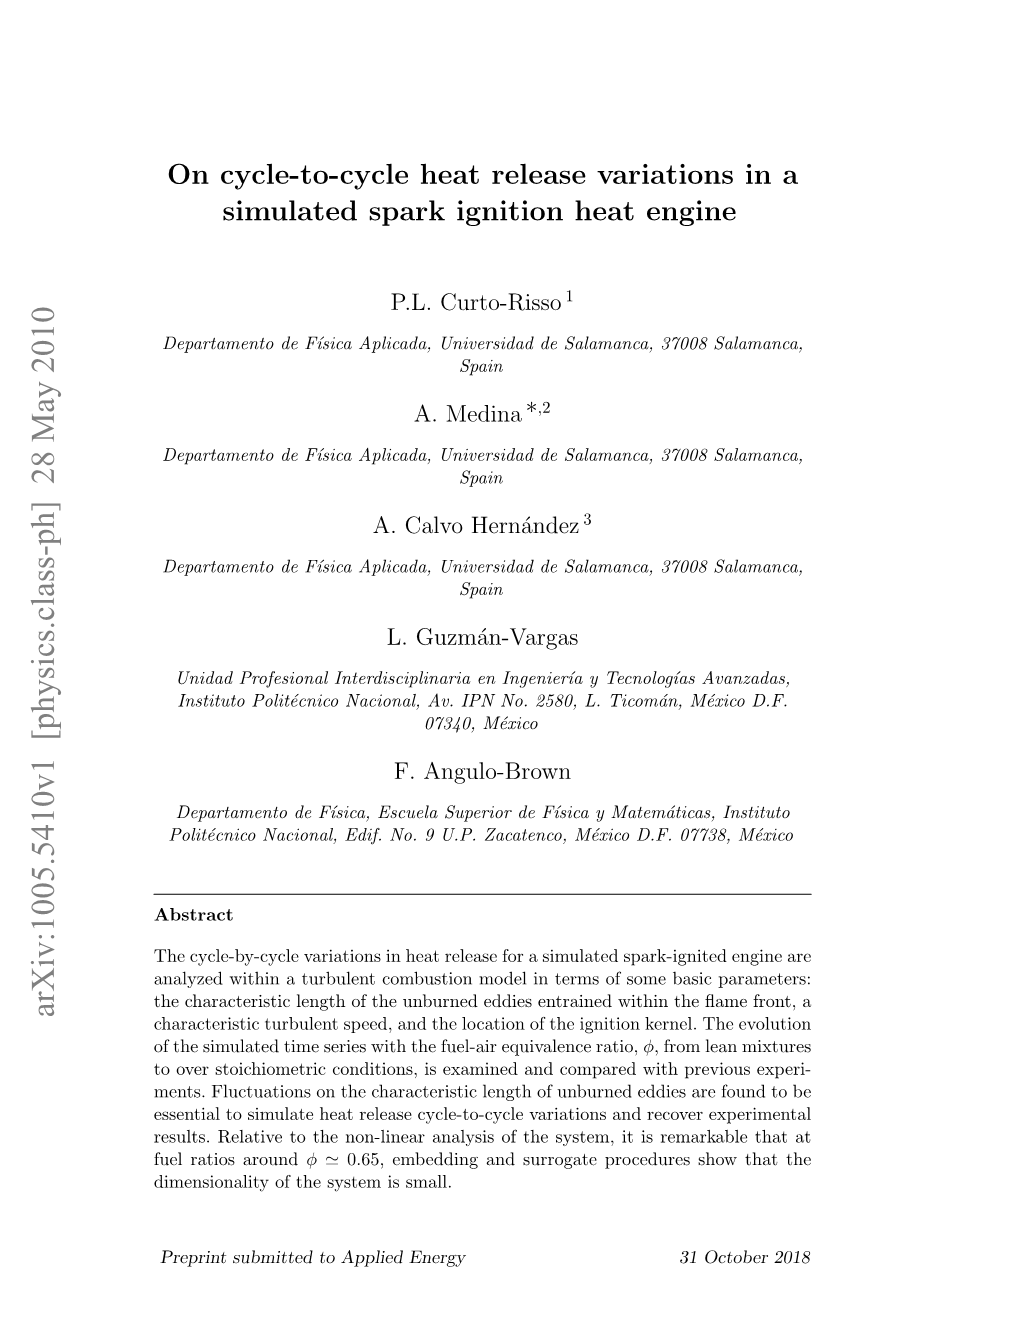 On Cycle-To-Cycle Heat Release Variations in a Simulated Spark Ignition Heat Engine